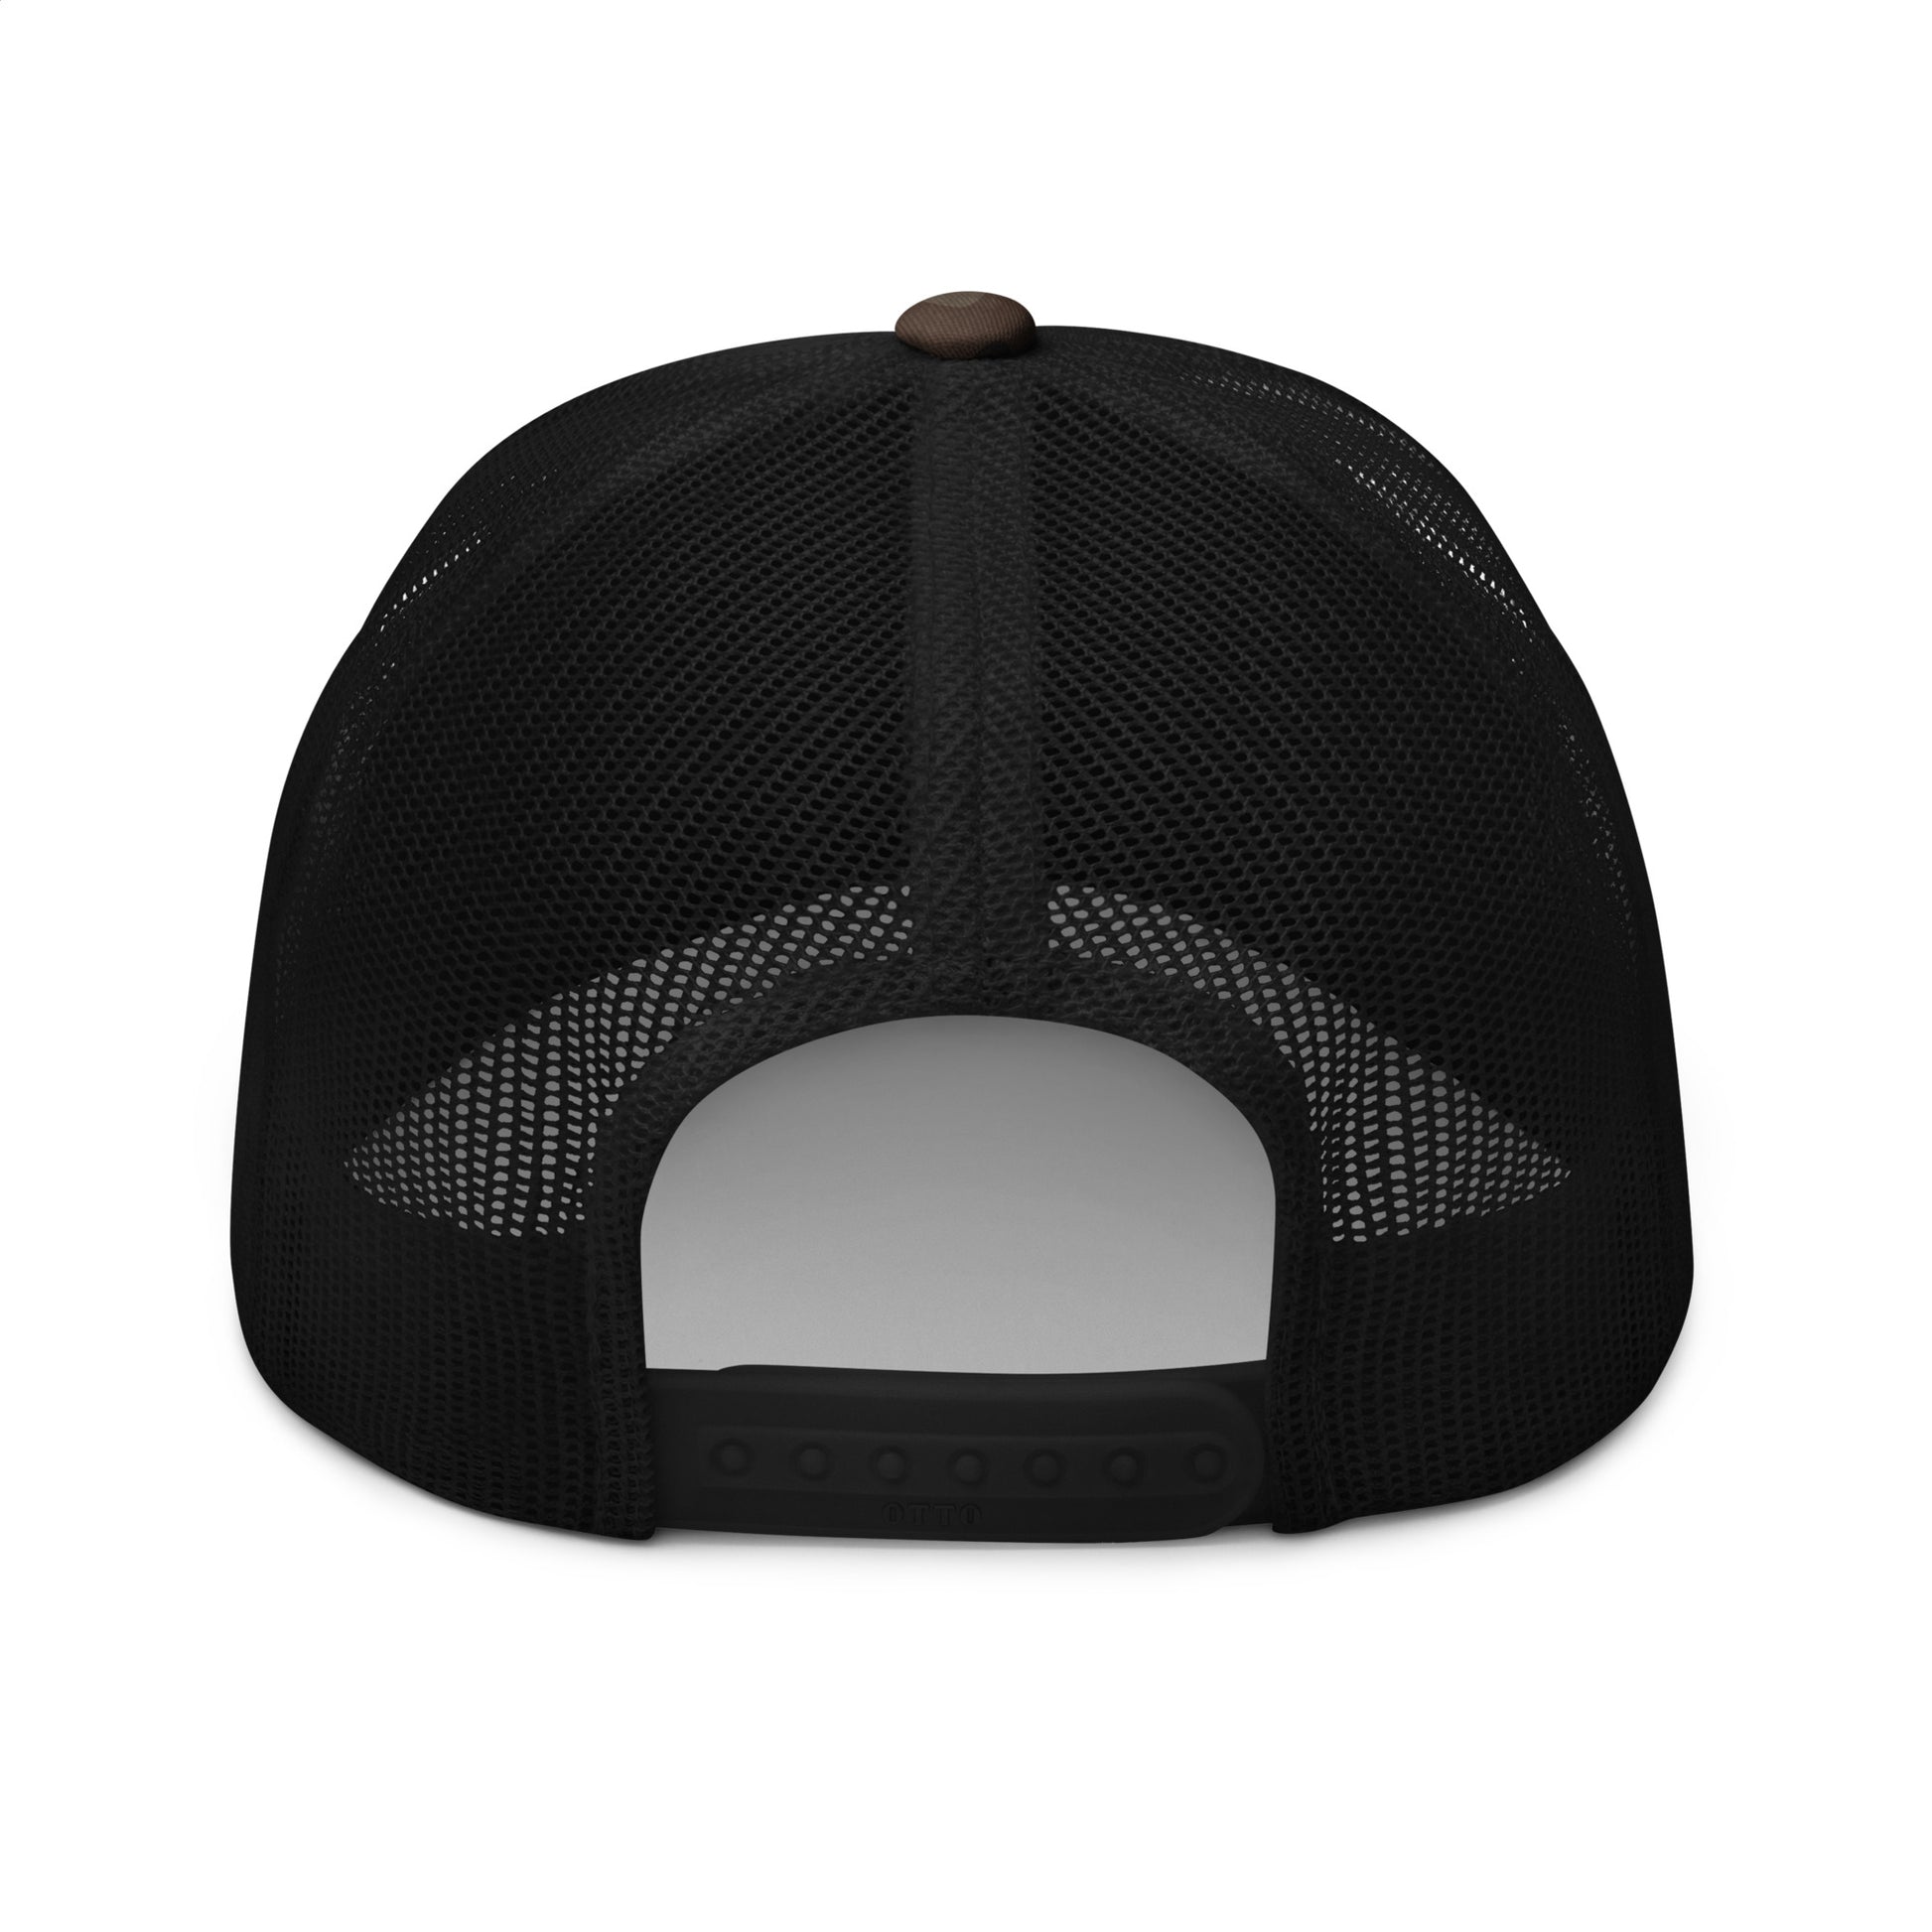 AMMO Pisspot Embroidered Mesh Snapback Trucker Style Hat or Cap